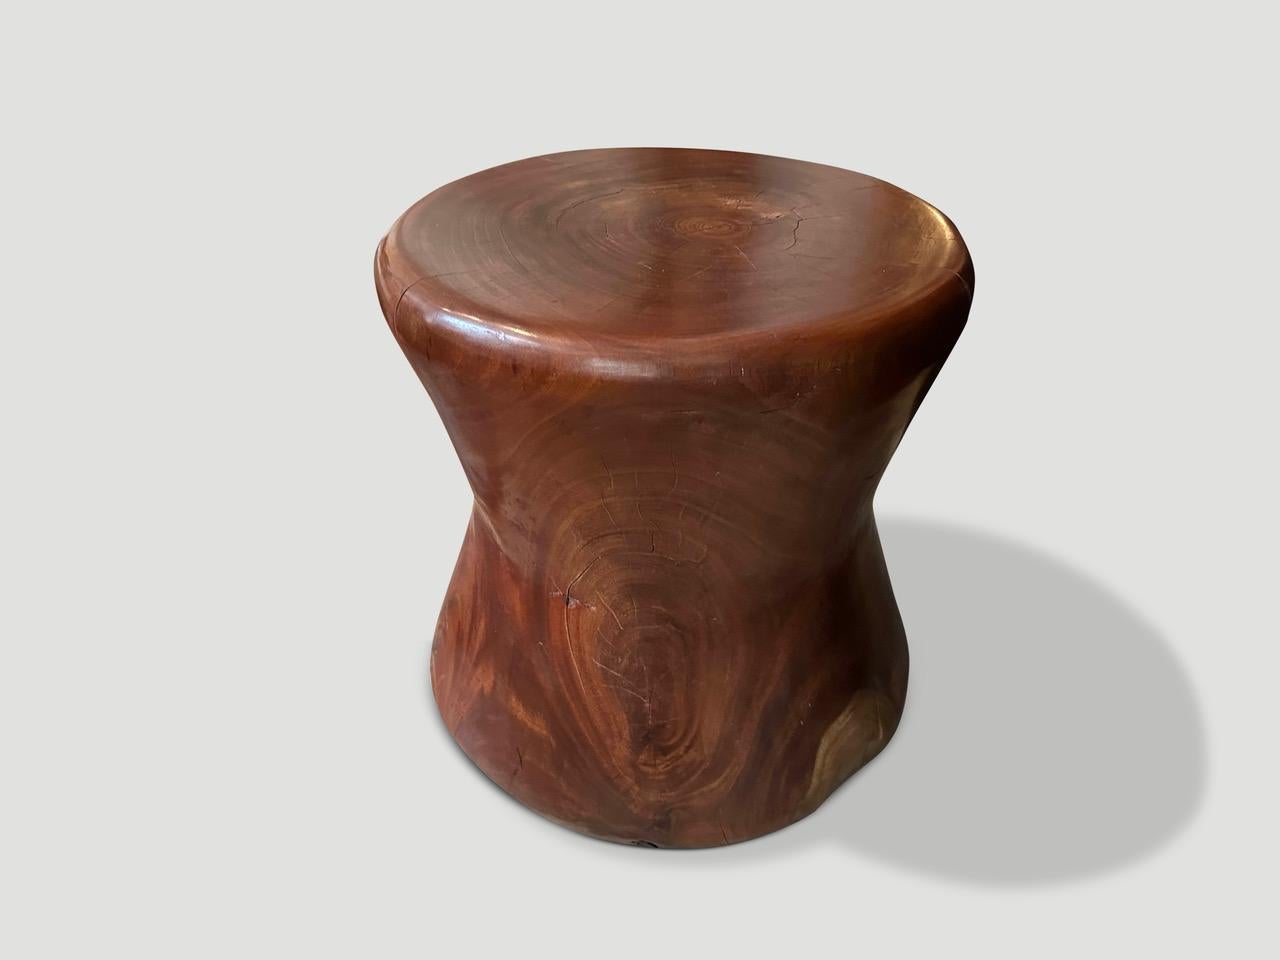 Impressive antique mortar originally used to grind rice. We turned it upside down and smoothed out the entire piece revealing the beautiful wood grain. Repurposed into a sculptural side table or stool. Full dimensions ; The inside is 6” thick x 9”